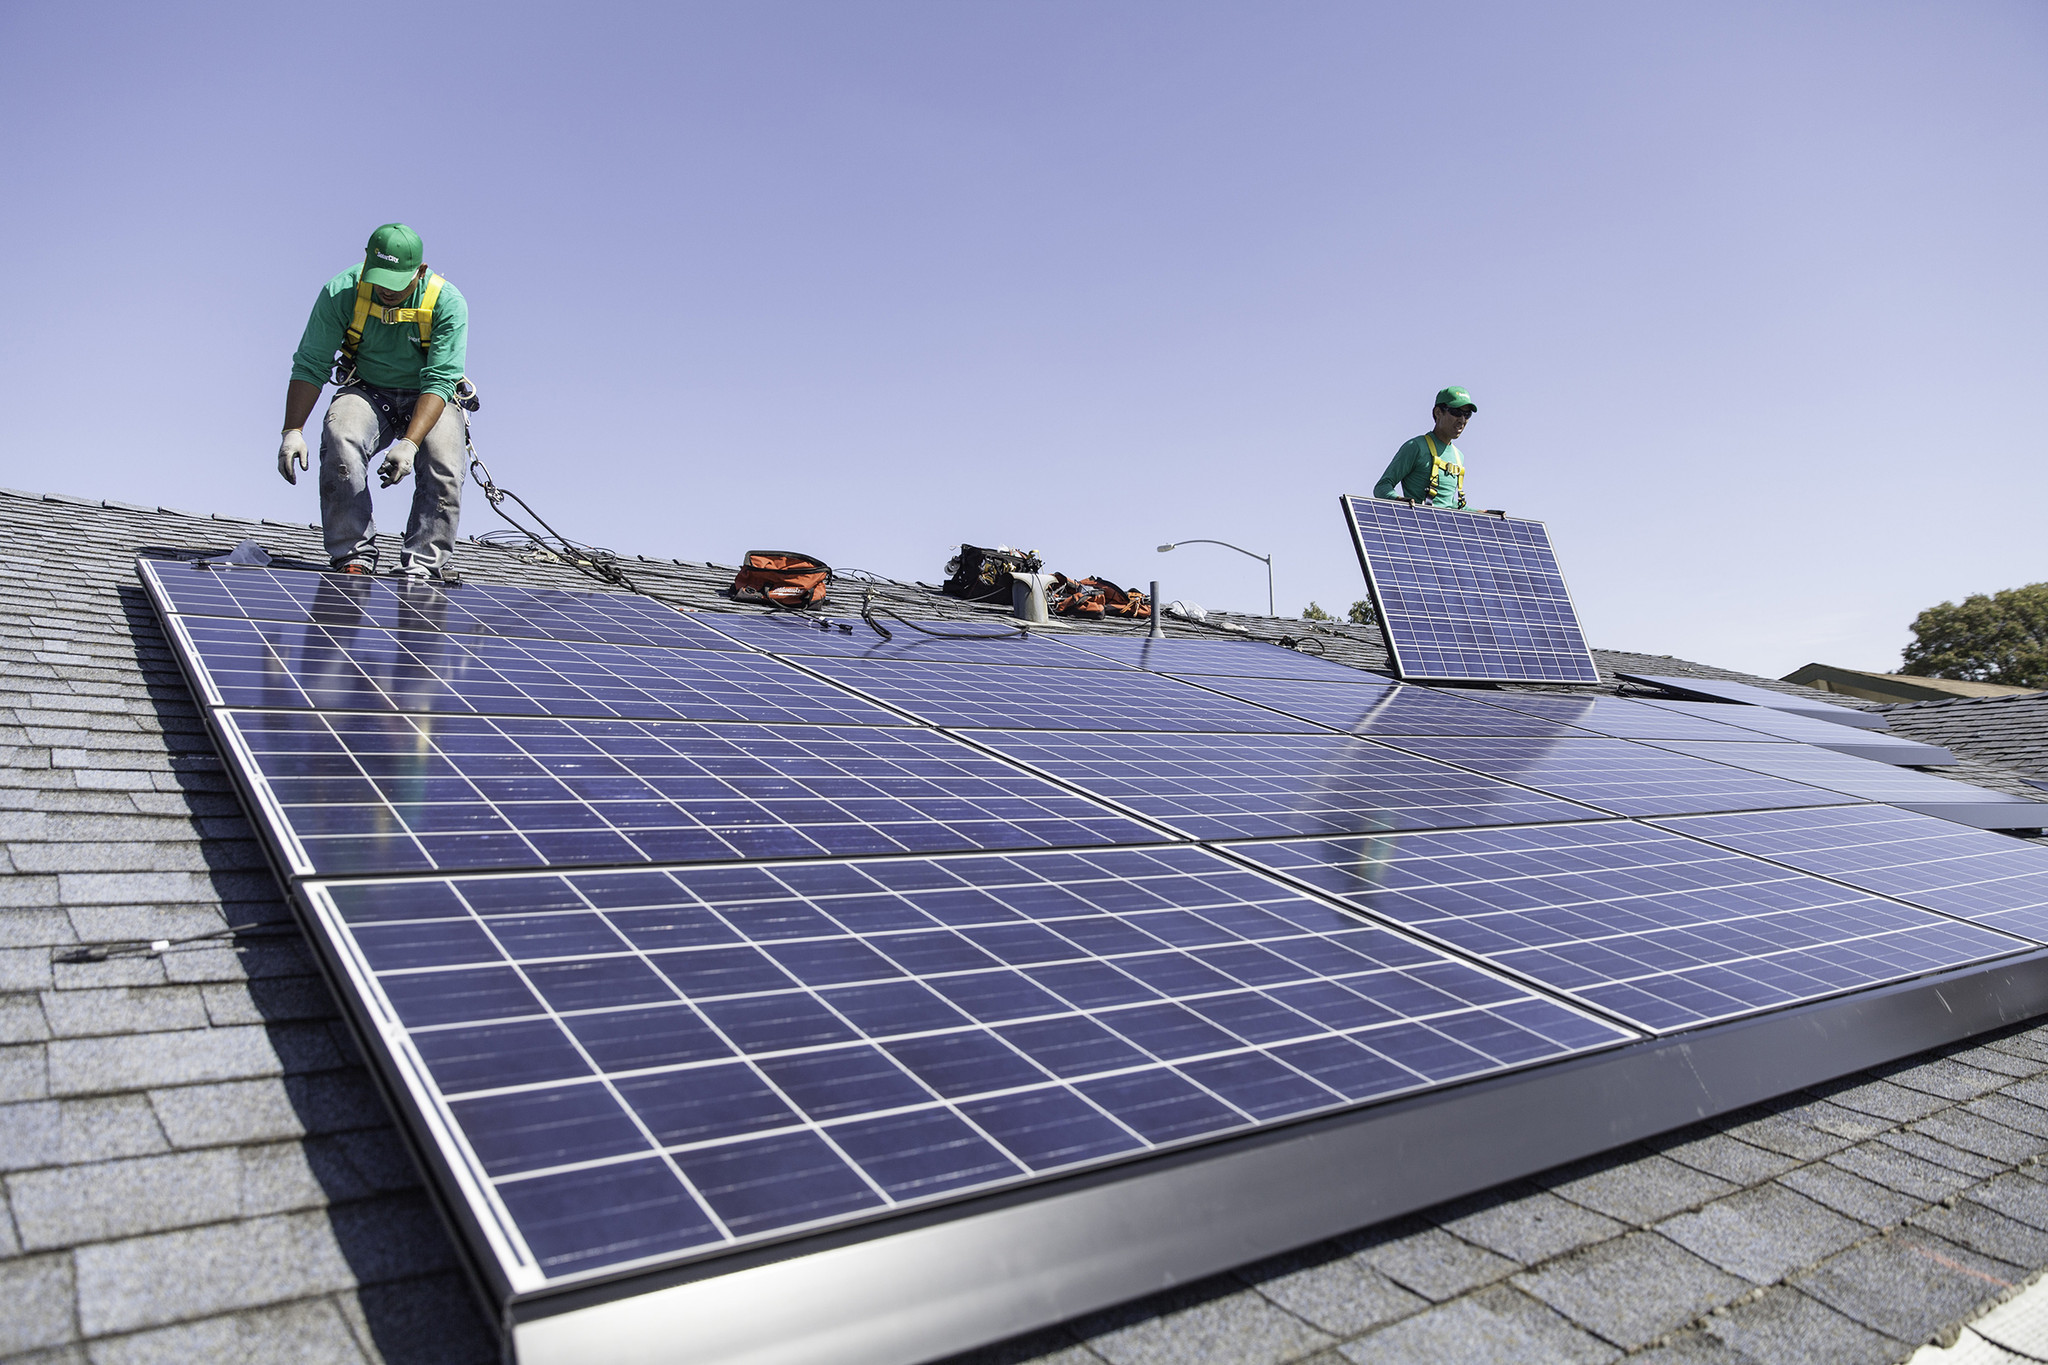 solarcity-now-offering-loans-to-buy-solar-systems-la-times